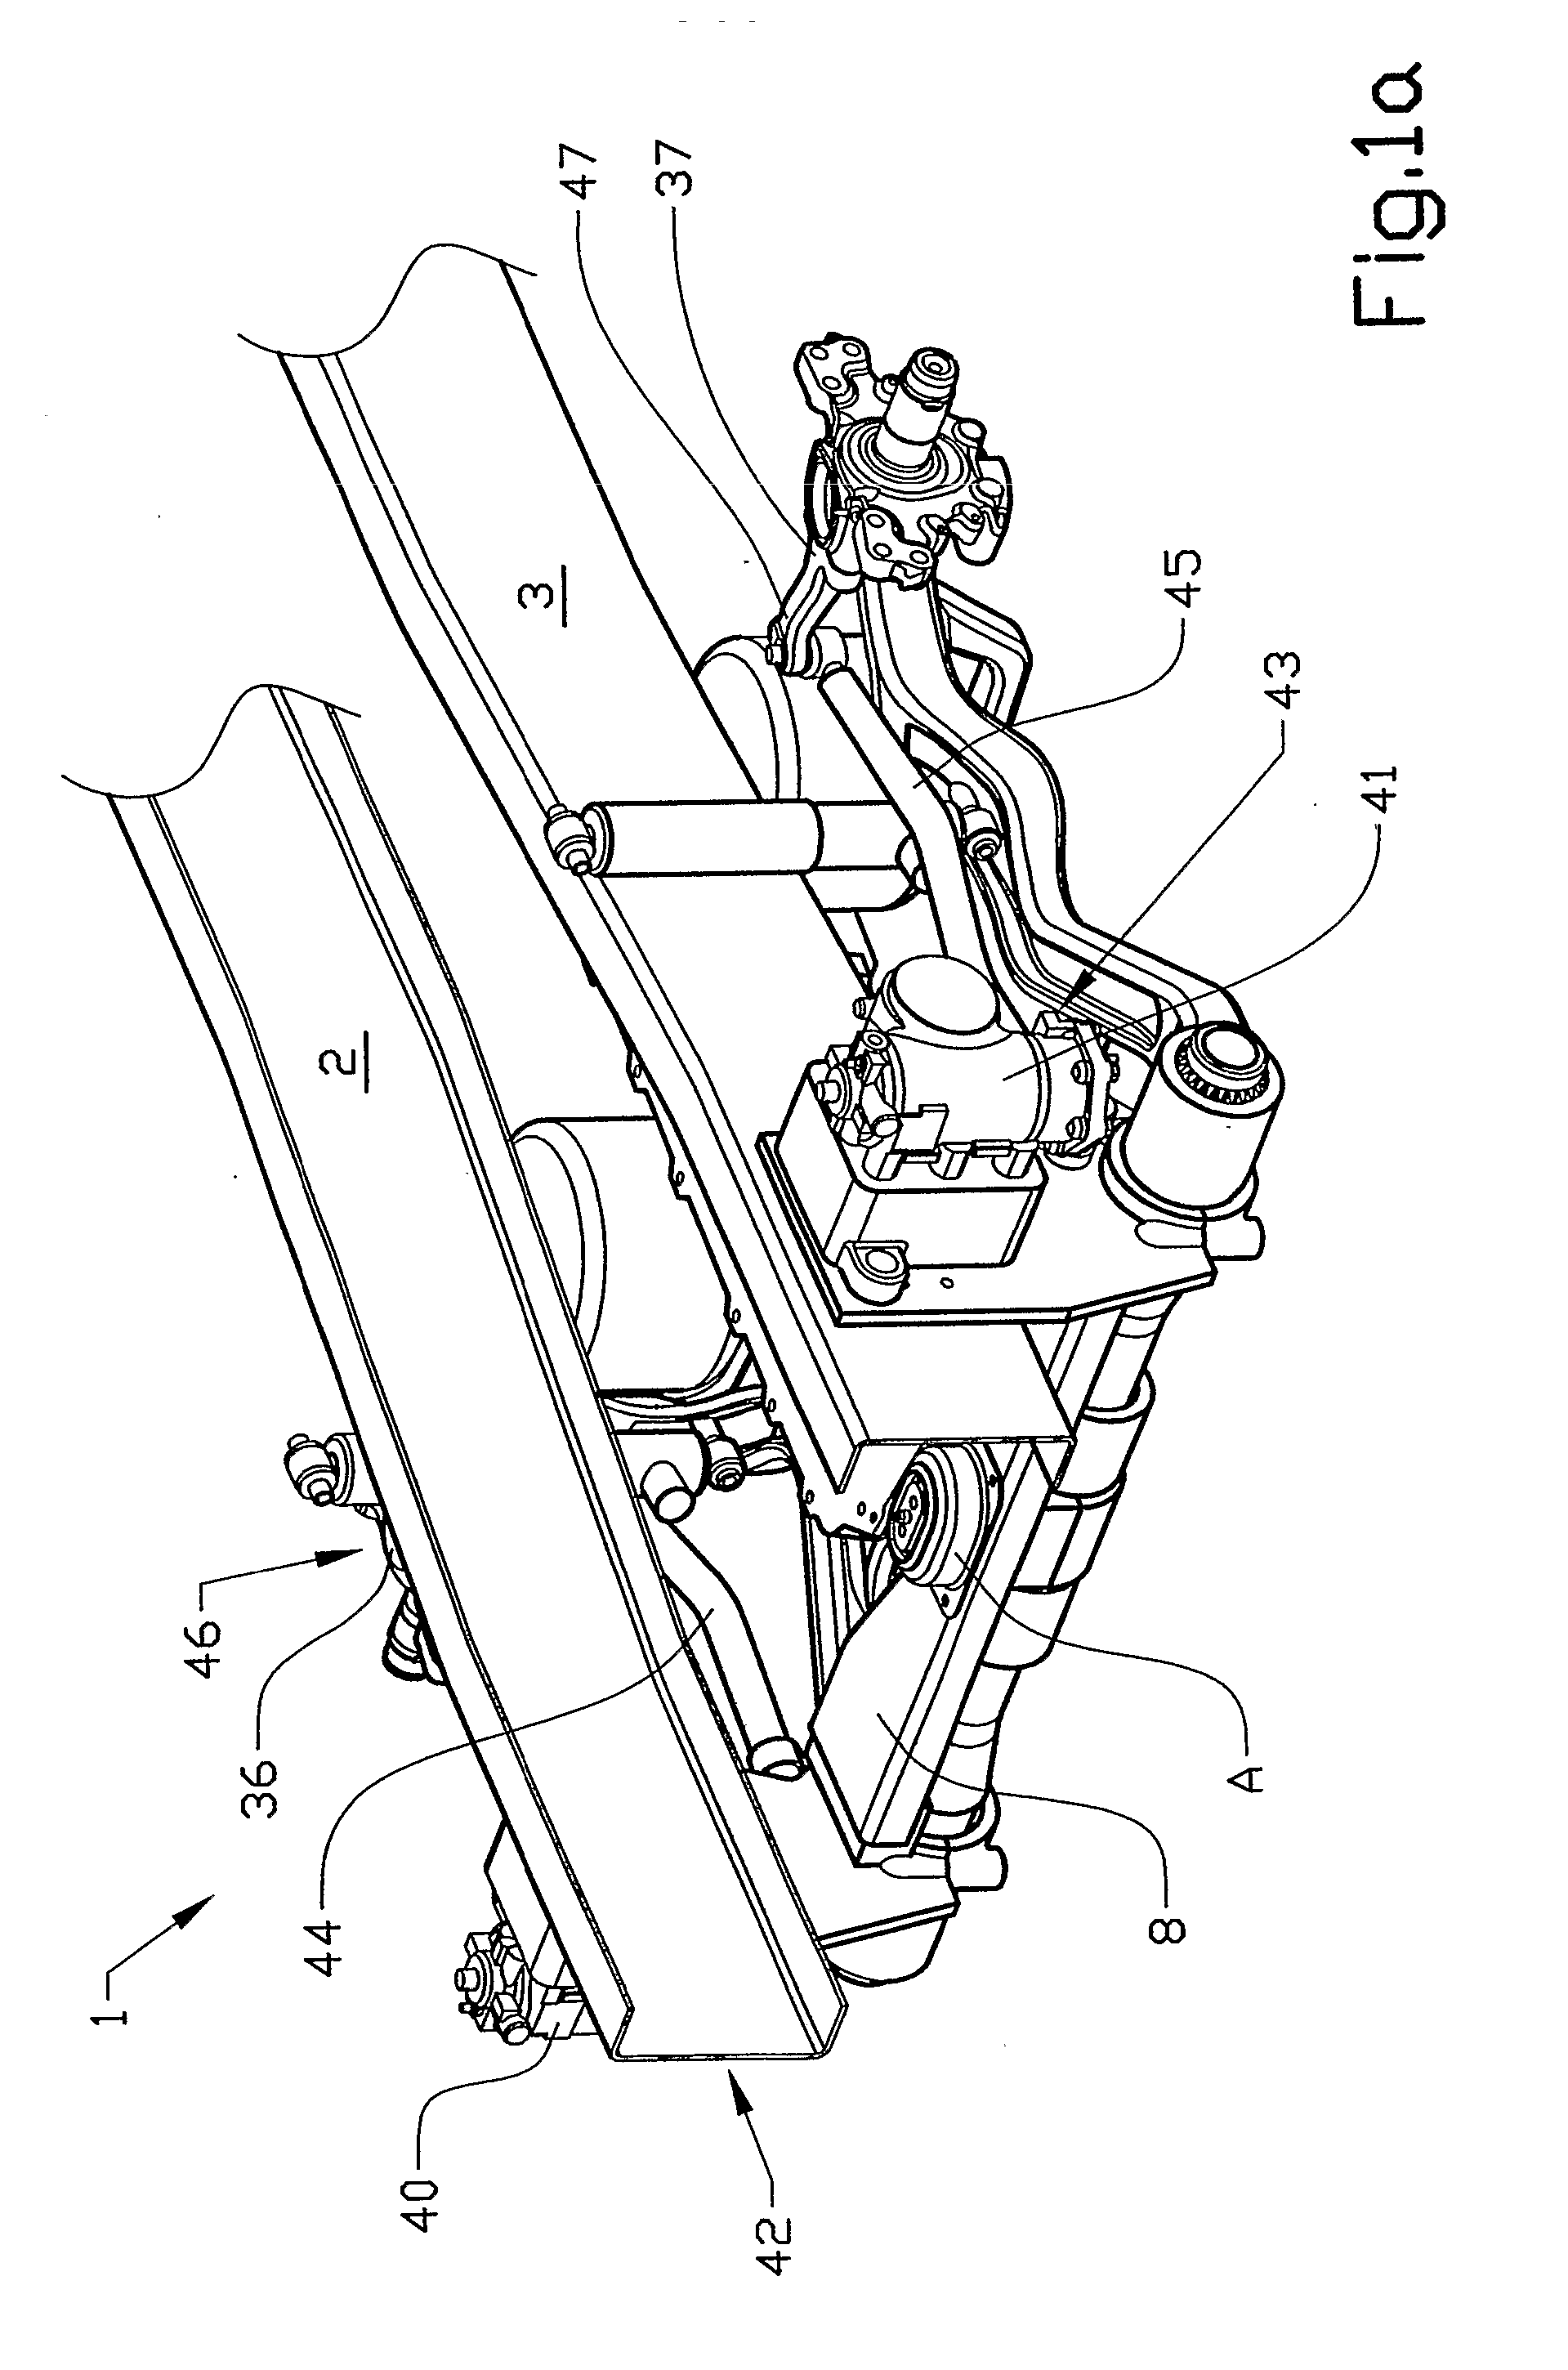 Independent front wheel suspension, vehicle equipped with such a front wheel suspension, and method of producing a sprung suspension